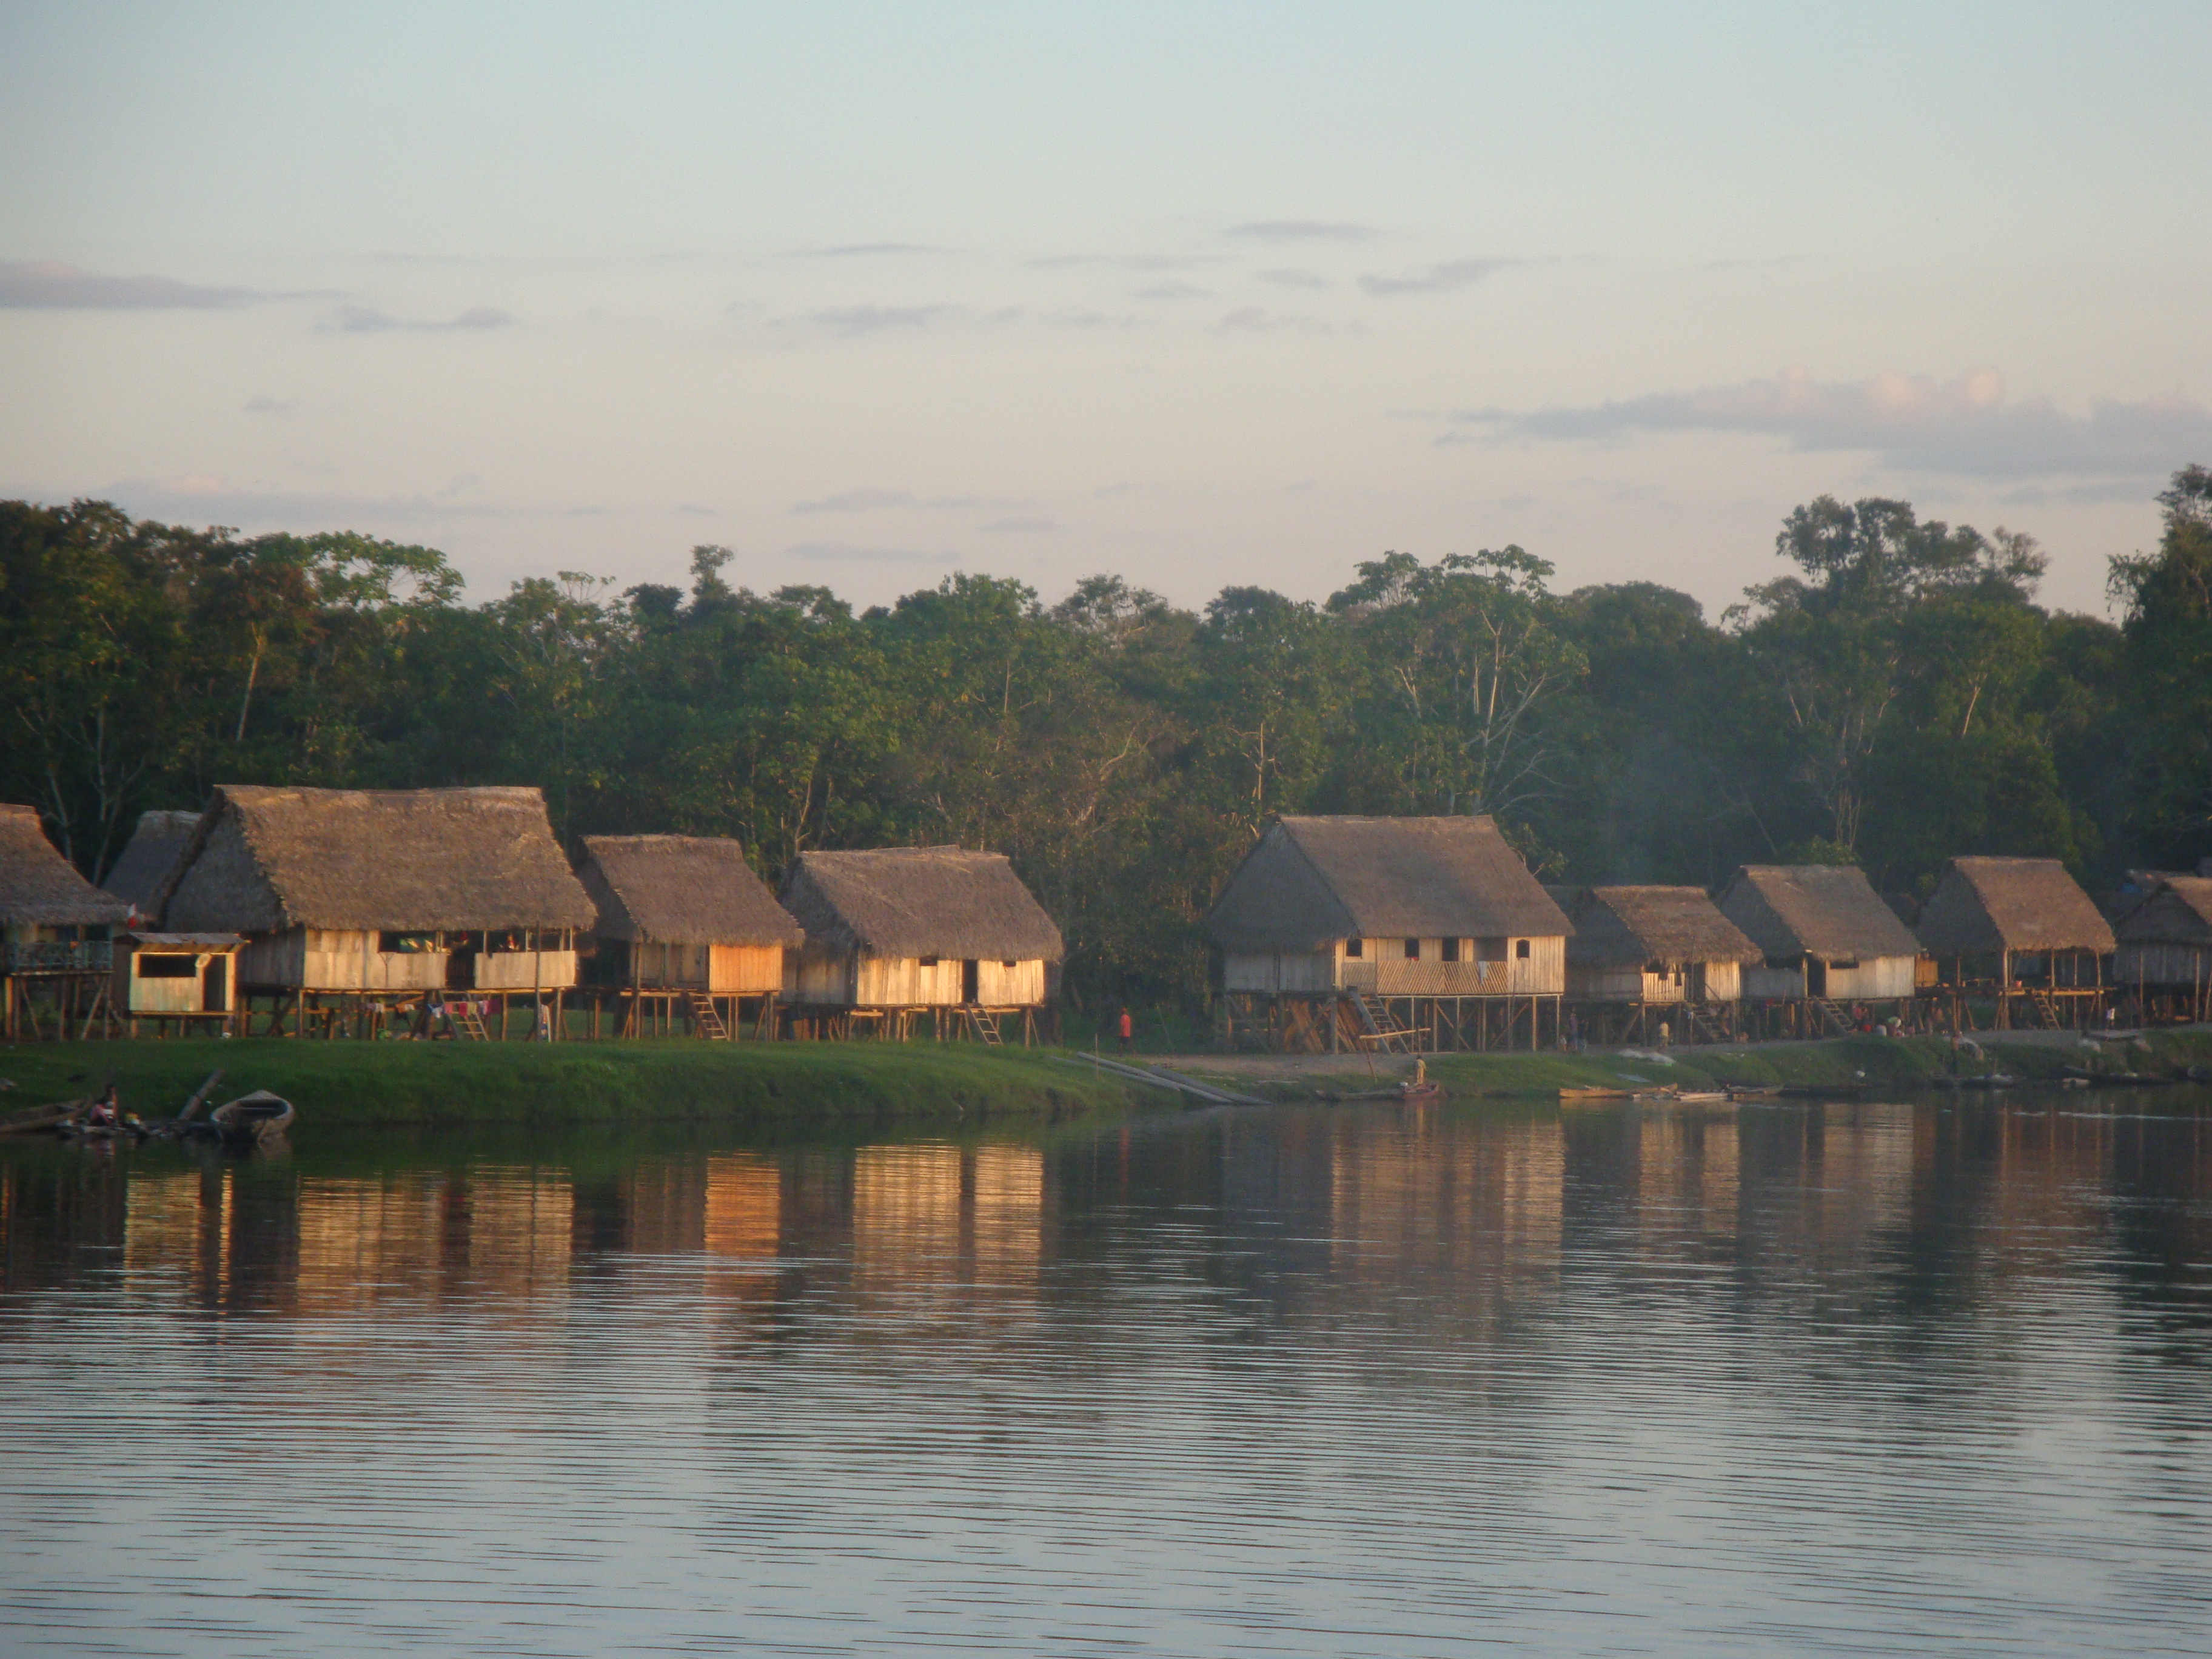 Huts on stilts close to the Amazon river in the tropical forest of South America